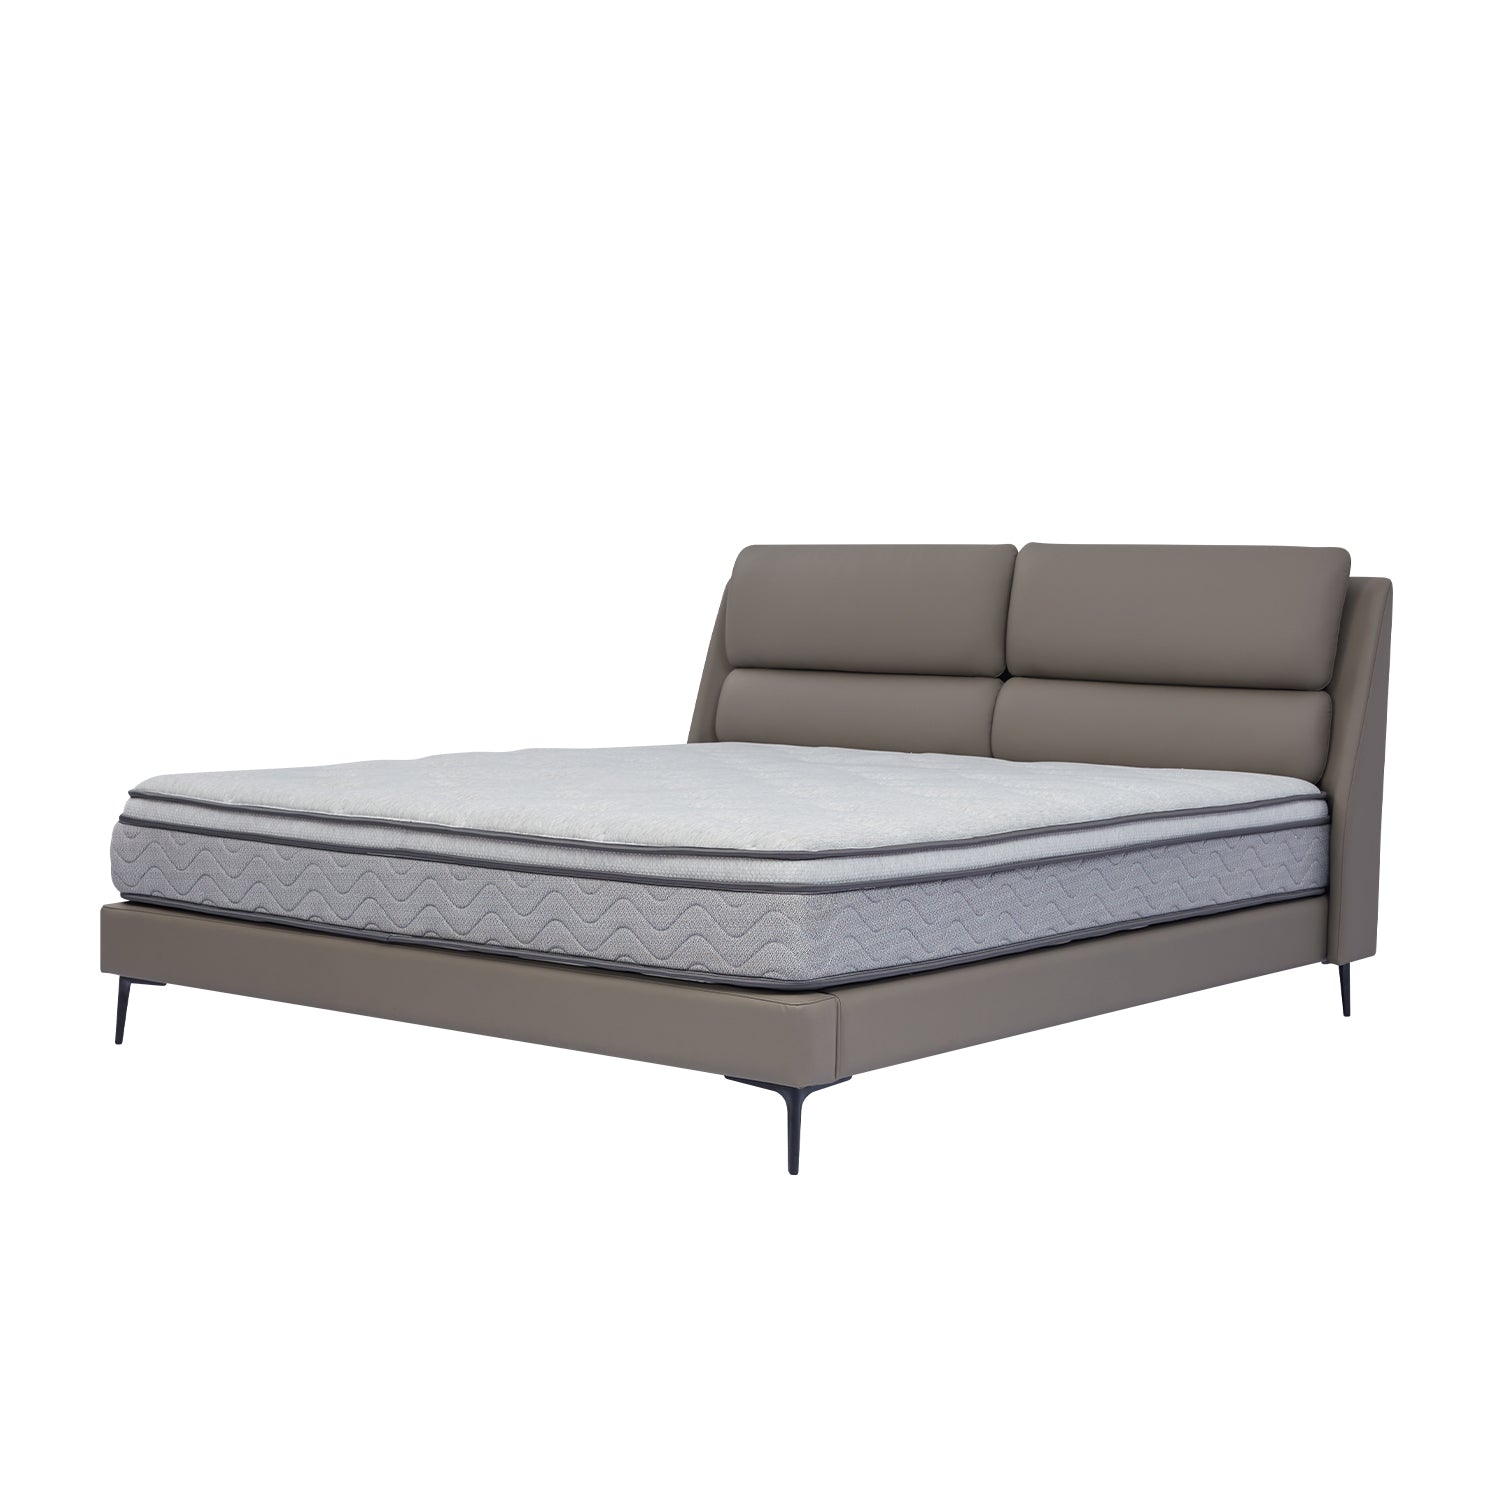 DeRUCCI bed frame BOC1 - 019 with grey upholstered headboard and base, matching mattress, and black legs, featuring a sleek modern design